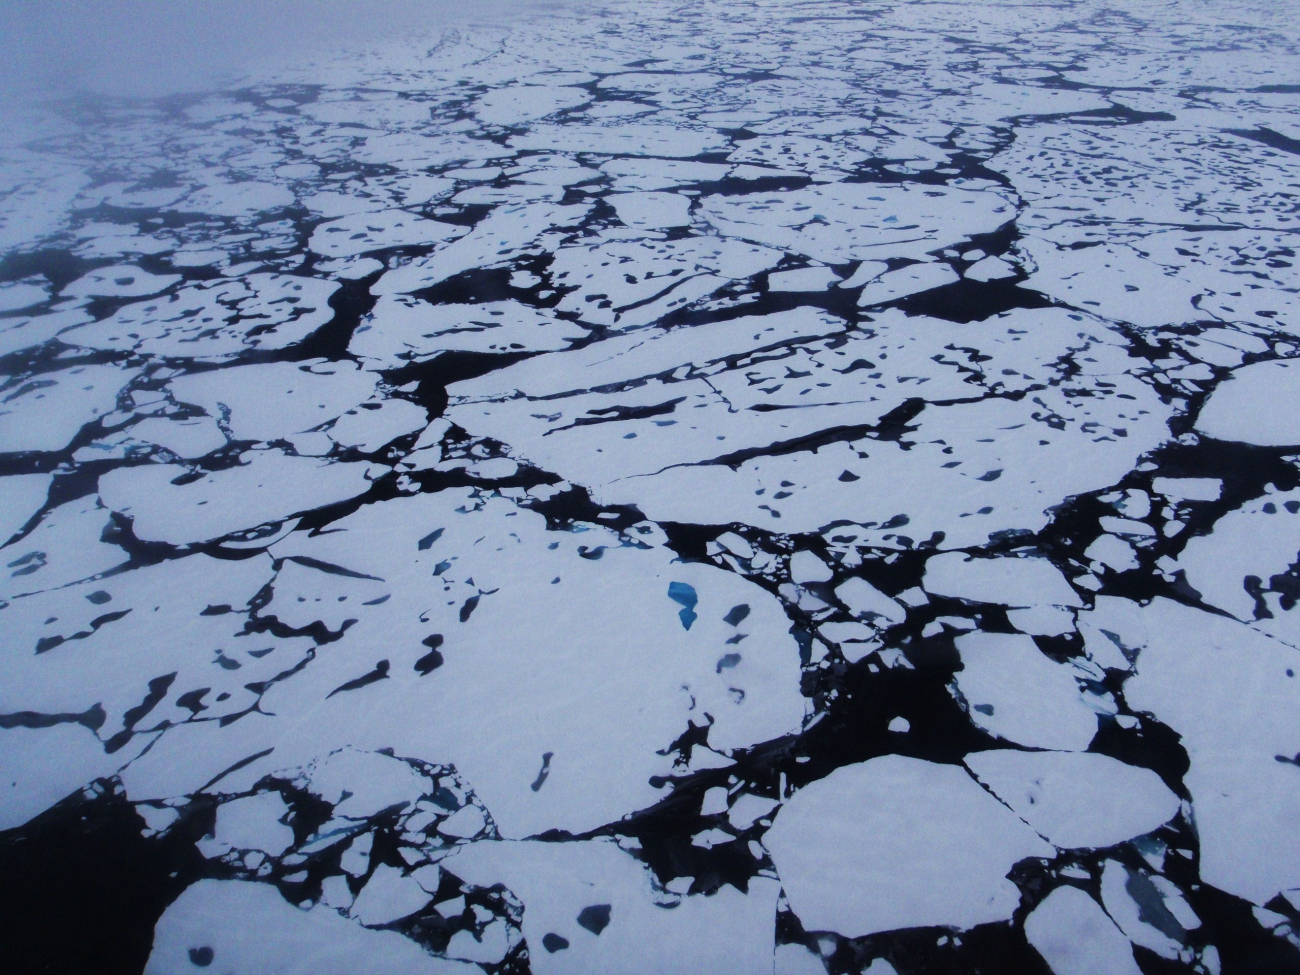 Helicopter eye view of ice floes, melt ponds, areas of brash ice, and otherphenomena